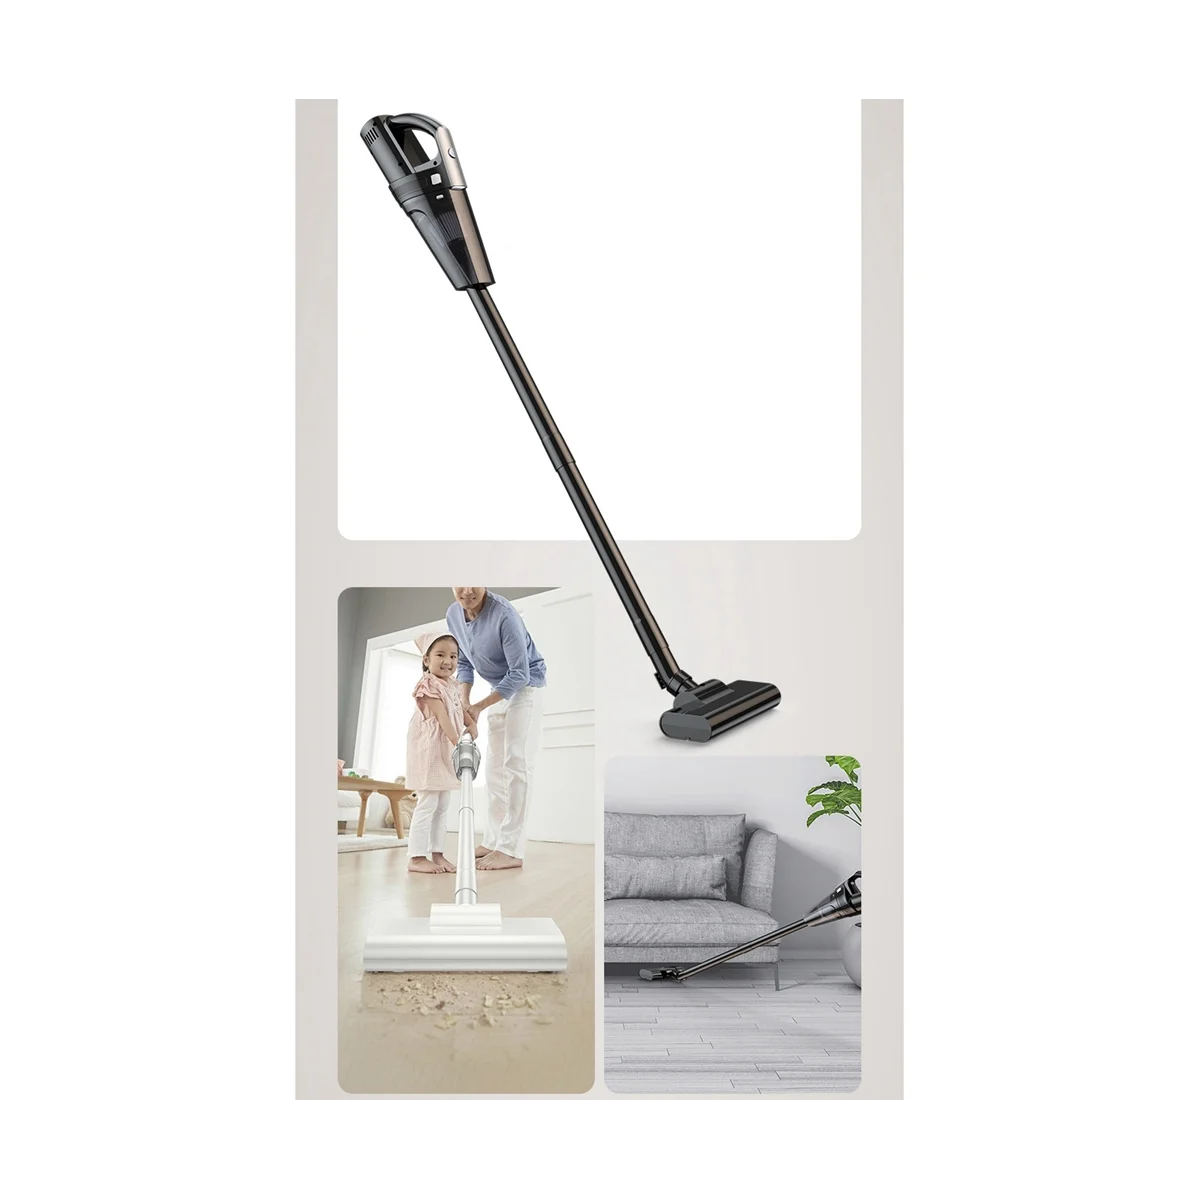 

7500PA Car Vacuum Cleaner Portable Strong Suction Multifunction Vacuum Cleaner Dual Handheld Floor Mop -White